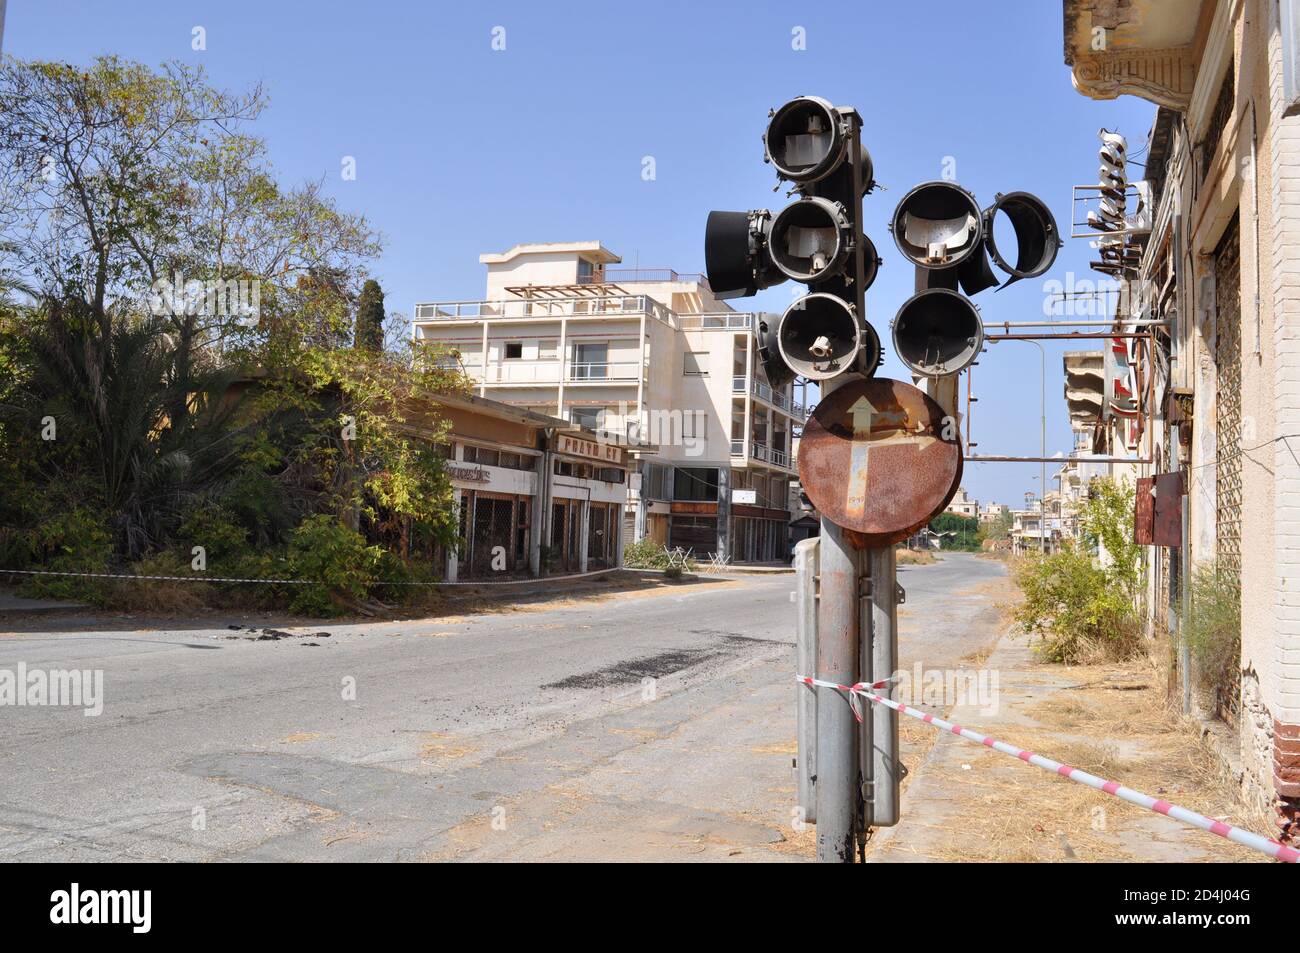 Famagusta, North Cyprus. 8th Oct, 2020. This picture taken on October 8, 2020, shows broken traffic lights and derelict buildings in the abandoned seaside resort of in the Turkish Republic of